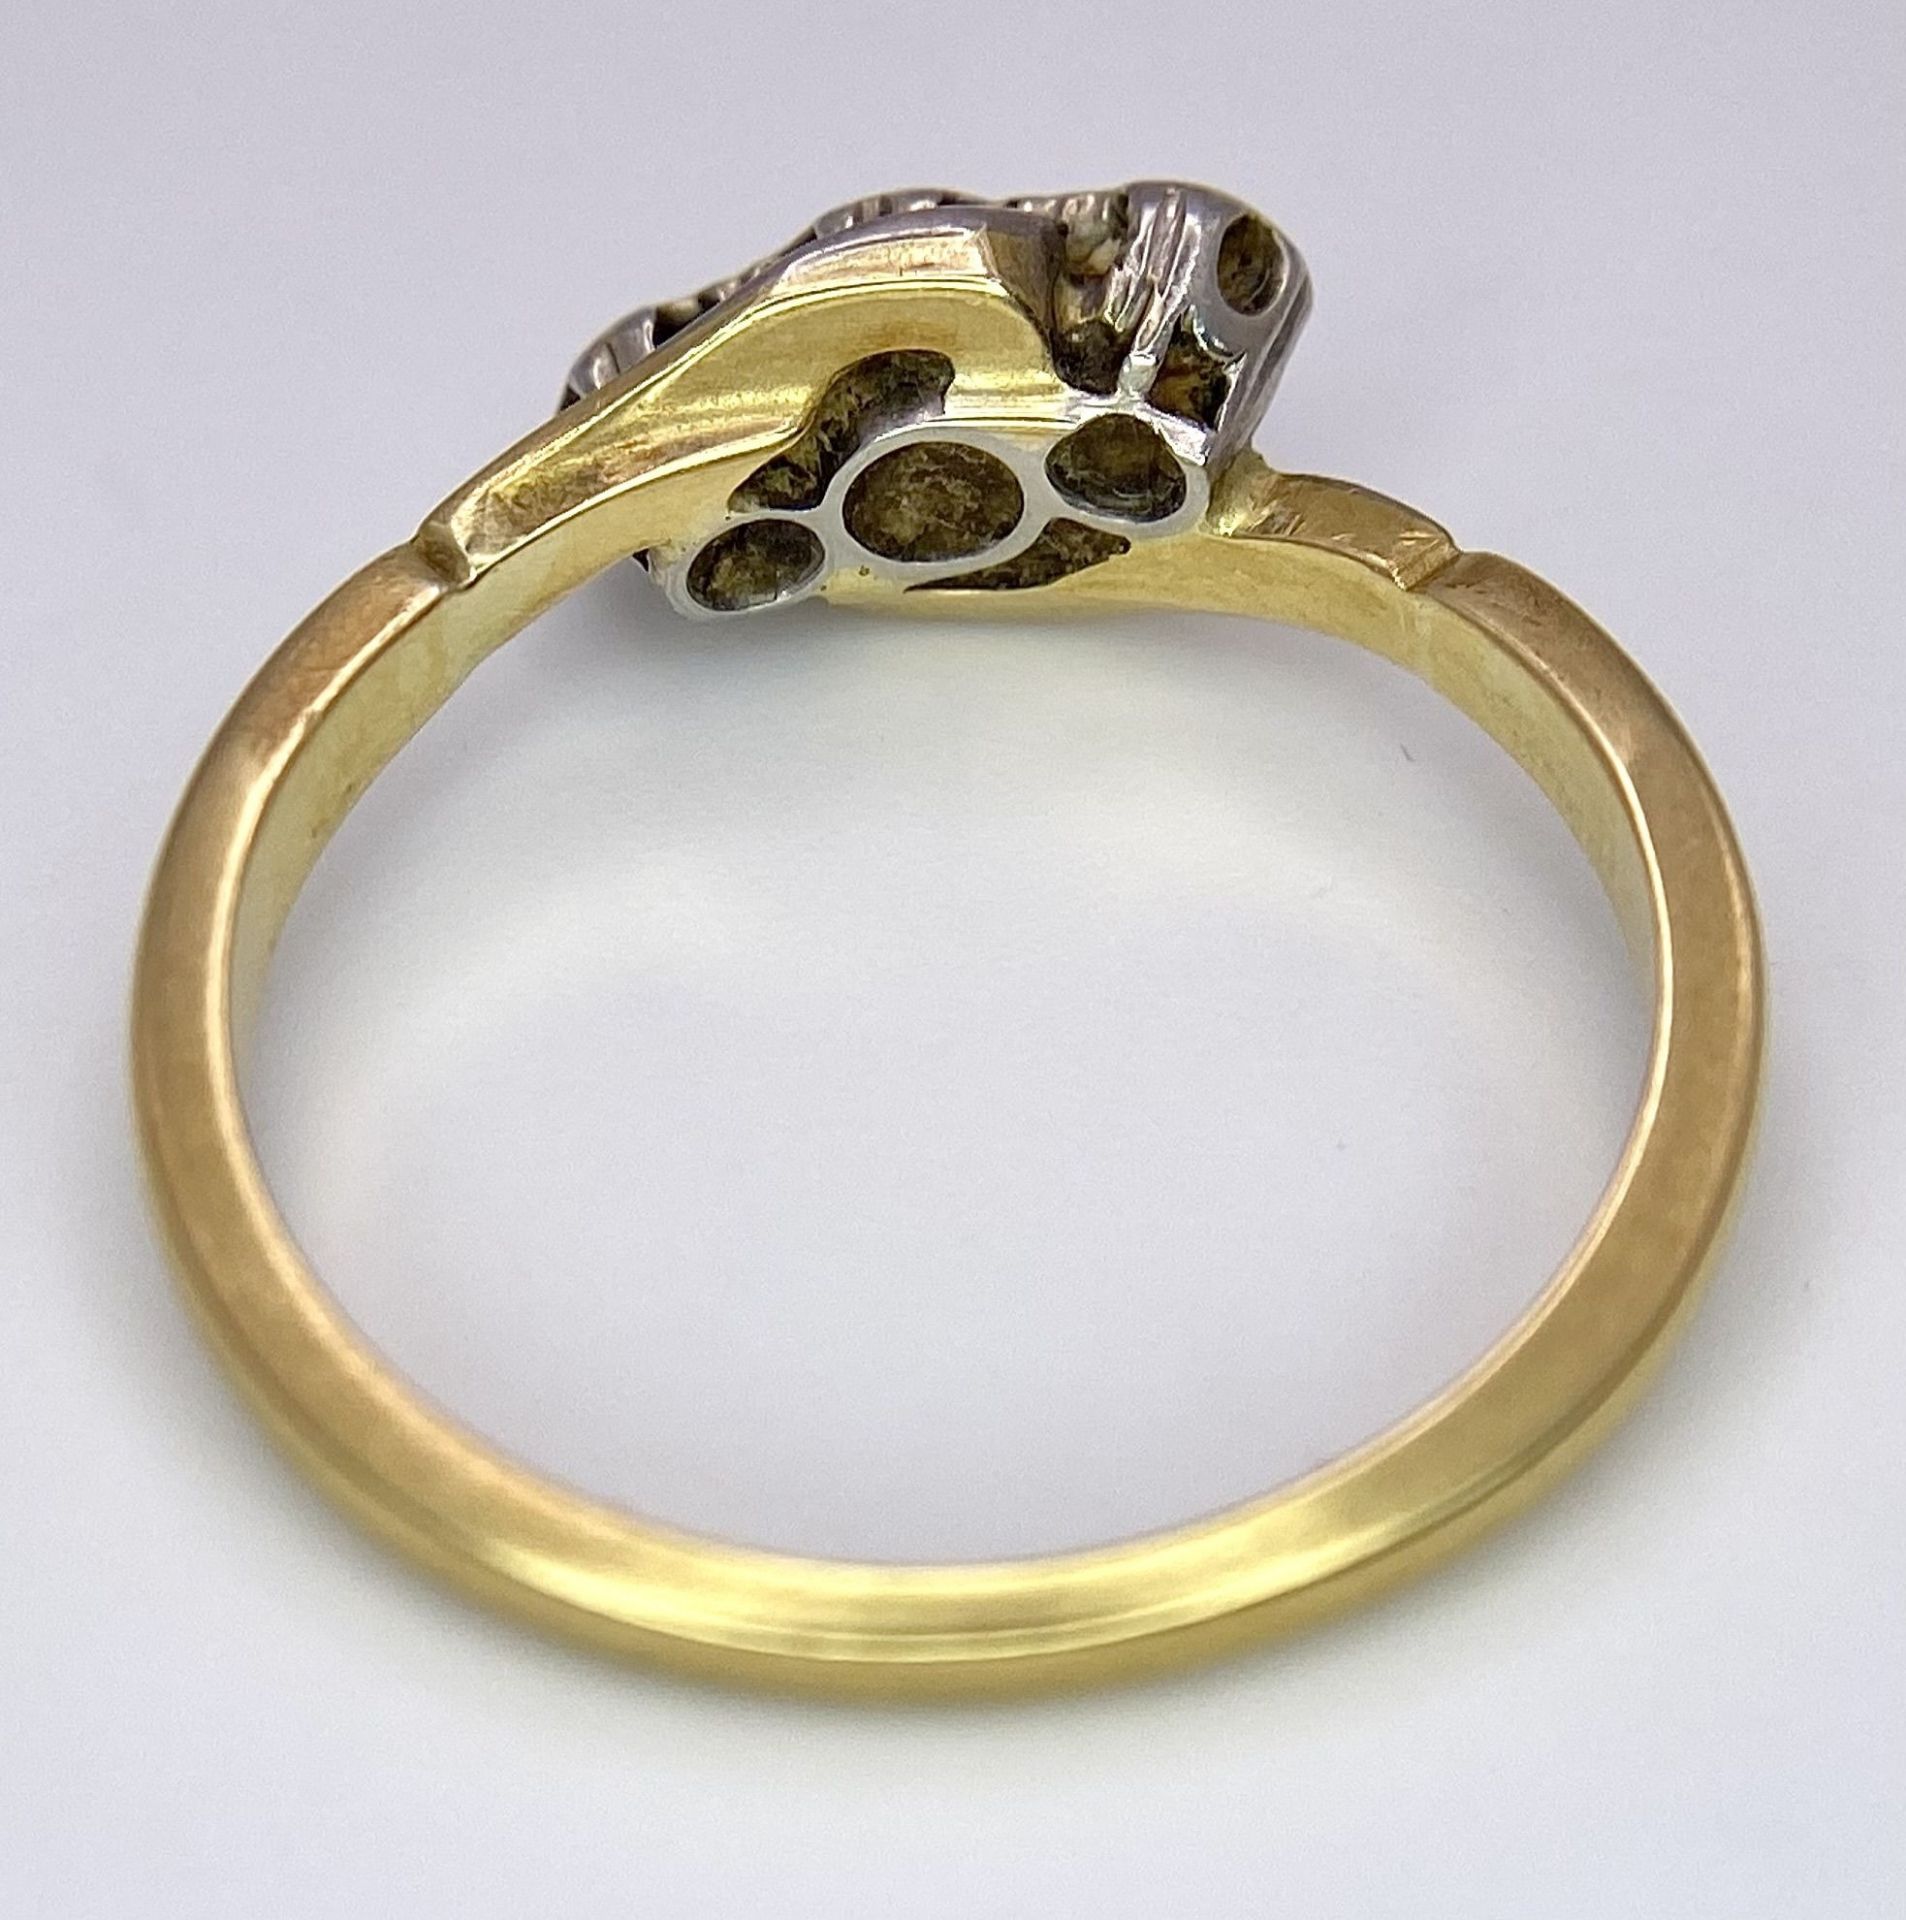 A Vintage 18K Yellow Gold, Platinum and Old Cut Diamond Crossover Ring. Three old cut gypsy-set - Image 5 of 6